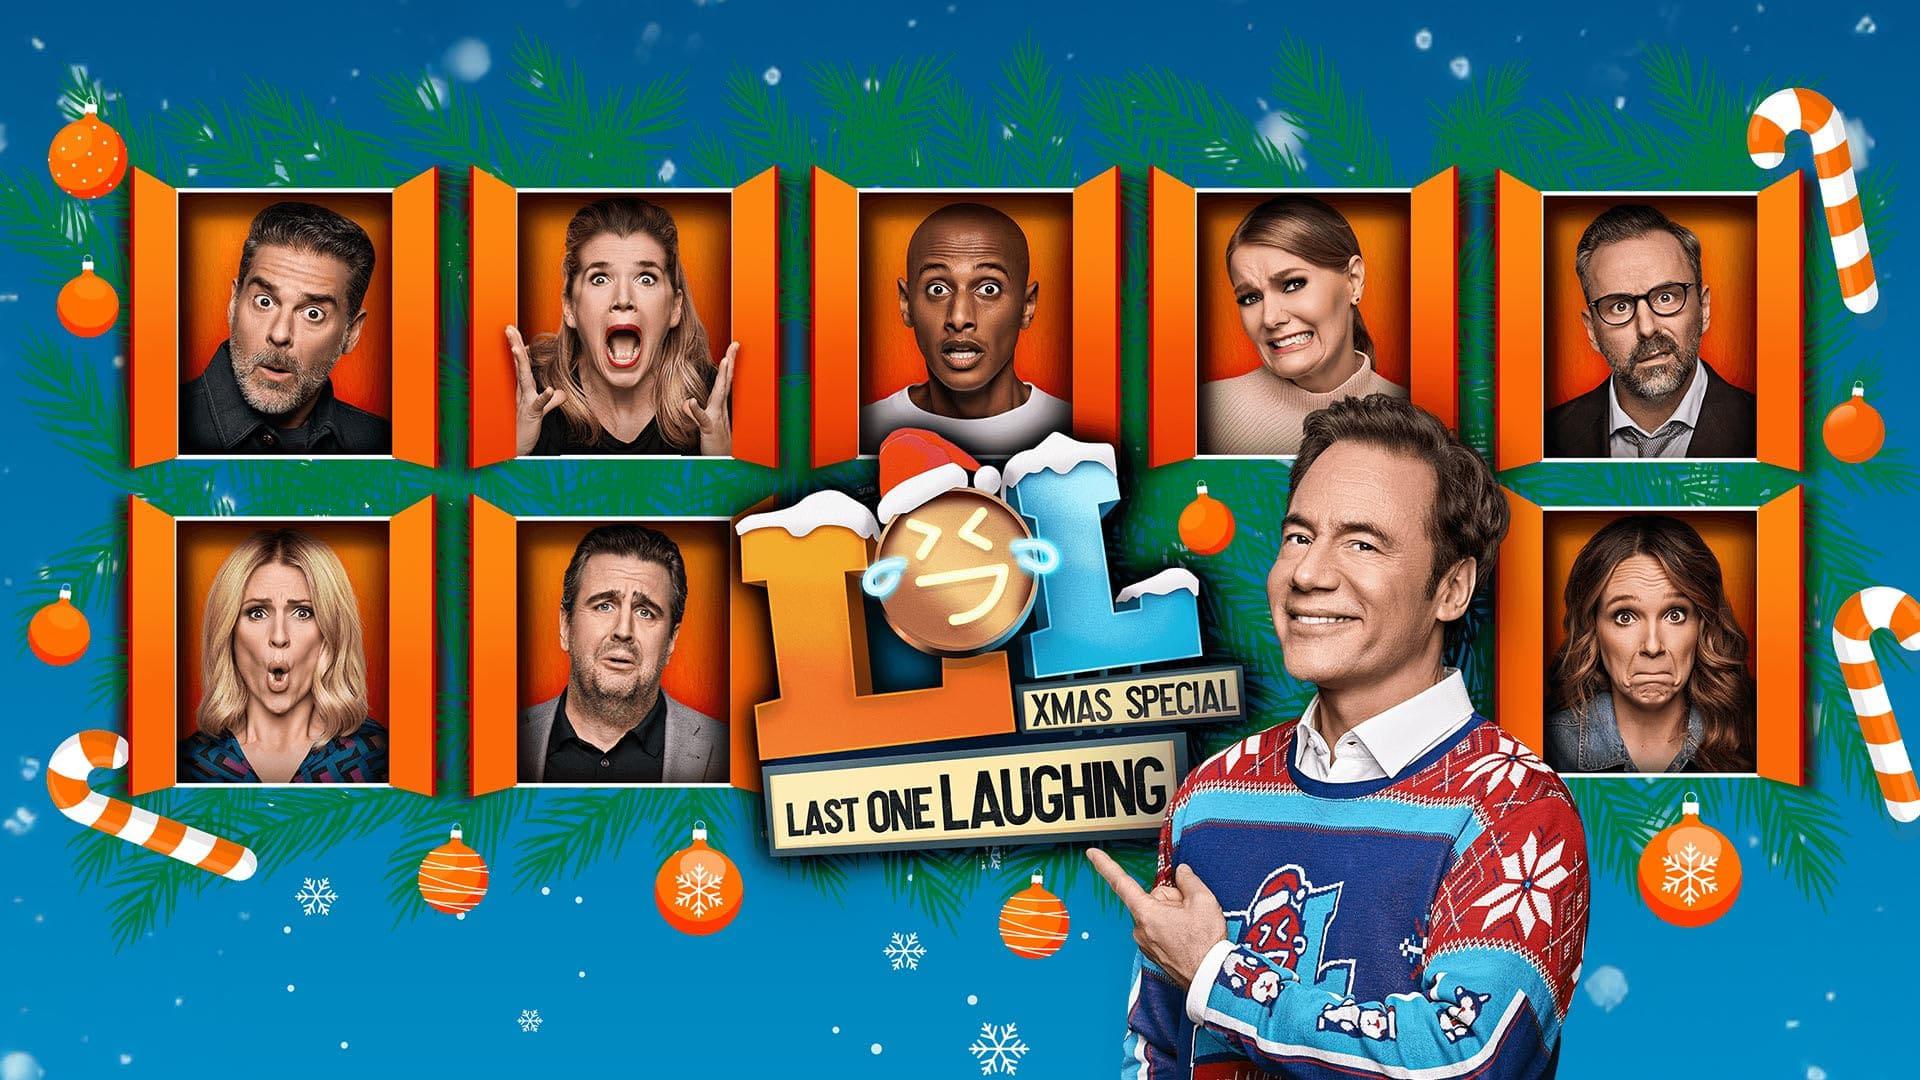 LOL: Last One Laughing - Xmas Special backdrop